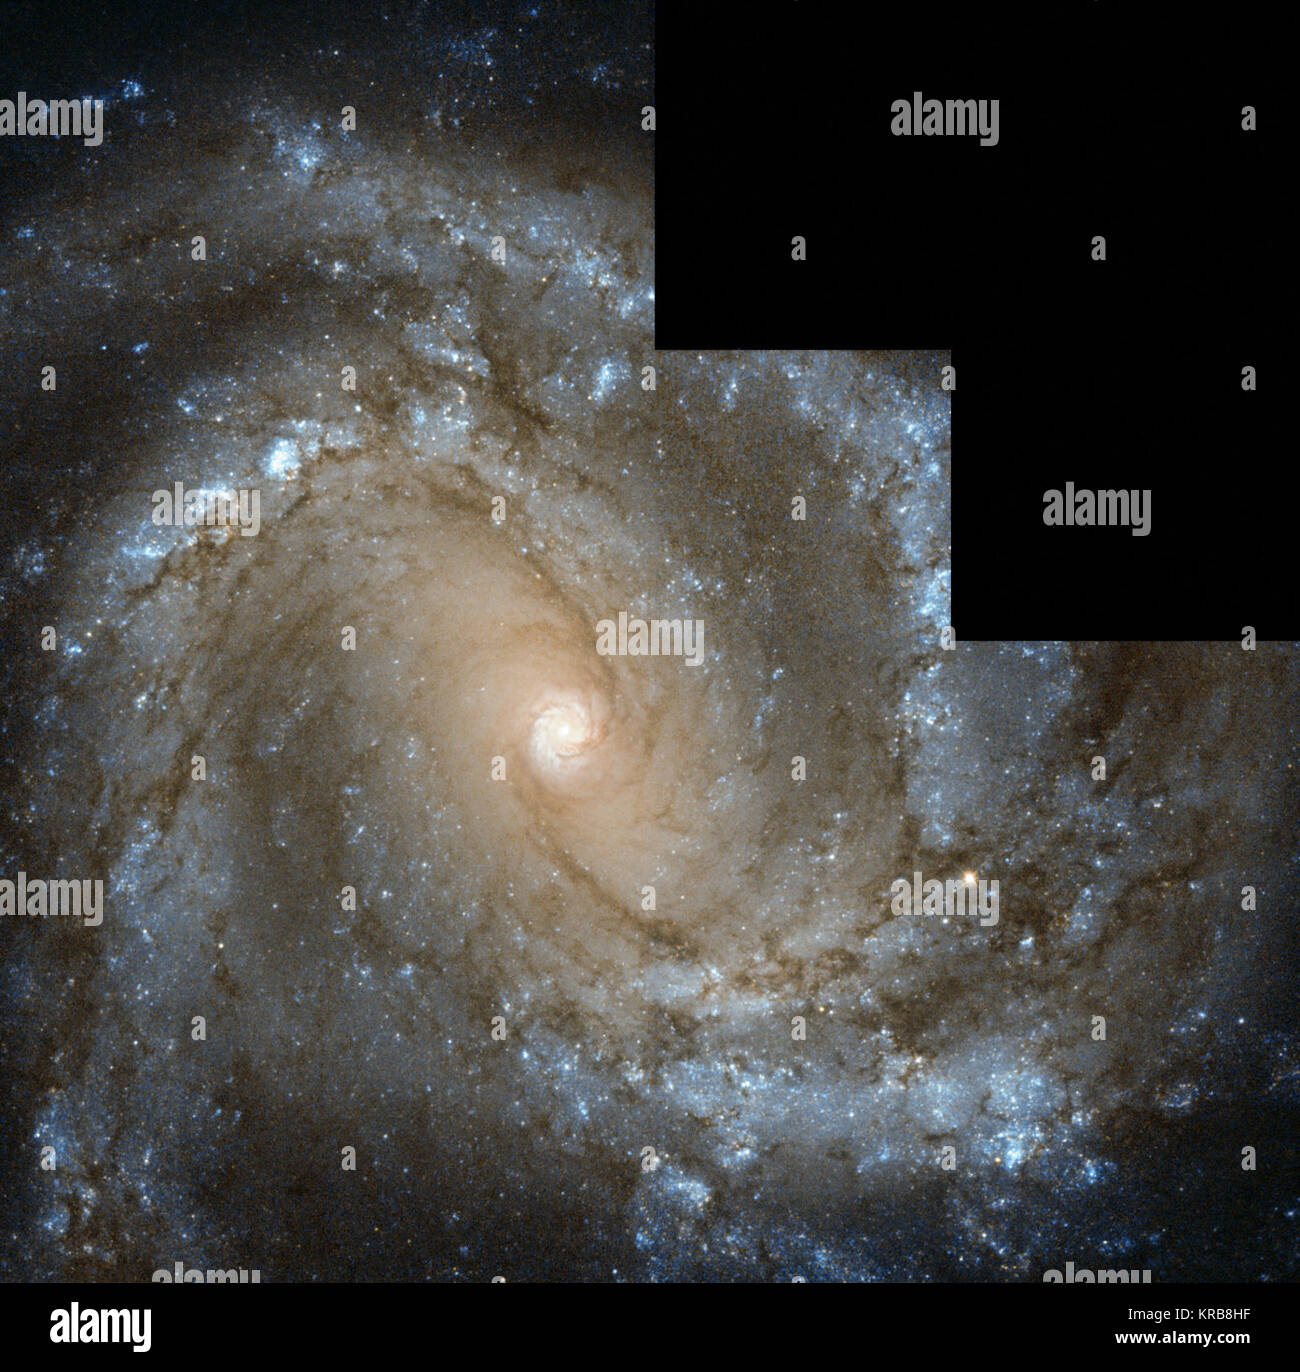 The  NASA/ESA Hubble Space Telescope has captured this image of nearby spiral galaxy Messier 61, also known as NGC 4303. The galaxy,  located only 55 million light-years away from Earth, is roughly the size  of the Milky Way, with a diameter of around 100 000 light-years. The  galaxy is notable for one particular reason — six supernovae have been  observed within Messier 61, a total that places it in the top handful of  galaxies alongside Messier 83, also with six, and NGC 6946, with a  grand total of nine observed supernovae. In  this Hubble image the galaxy is seen face-on as if posing for a Stock Photo